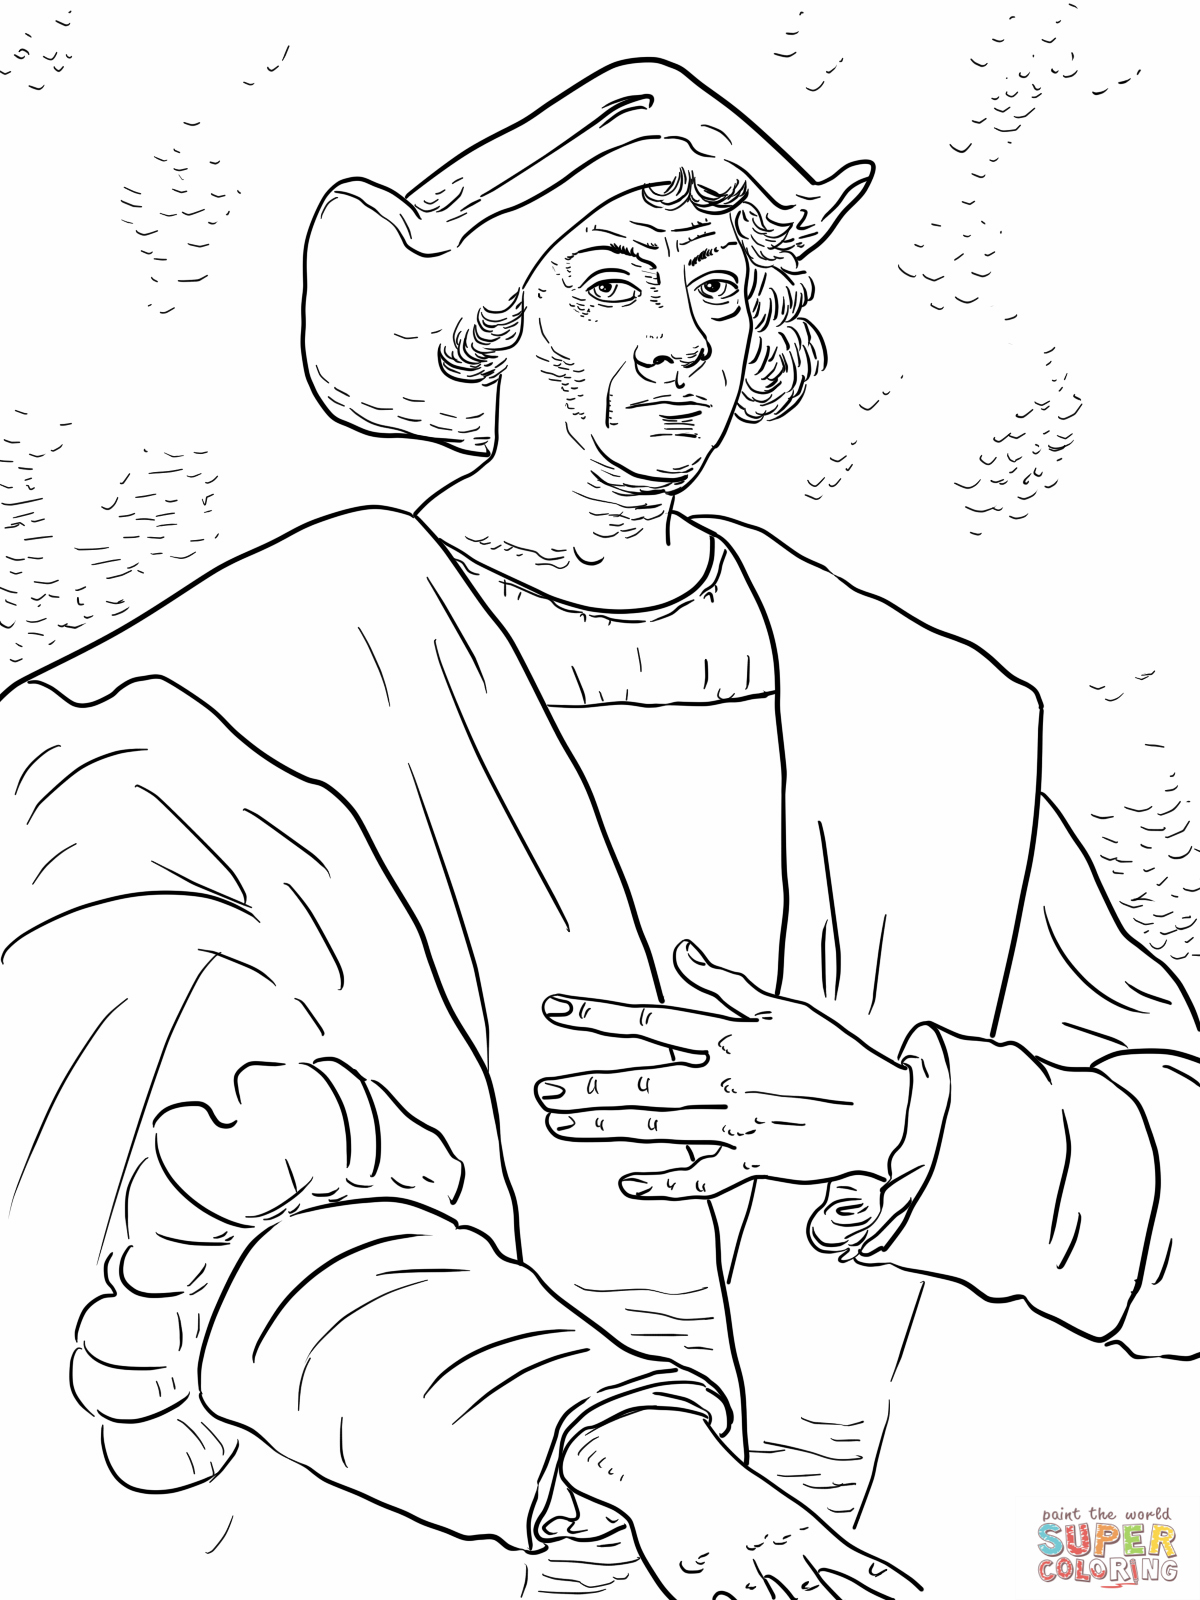 Christopher columbus coloring pages to download and print for free